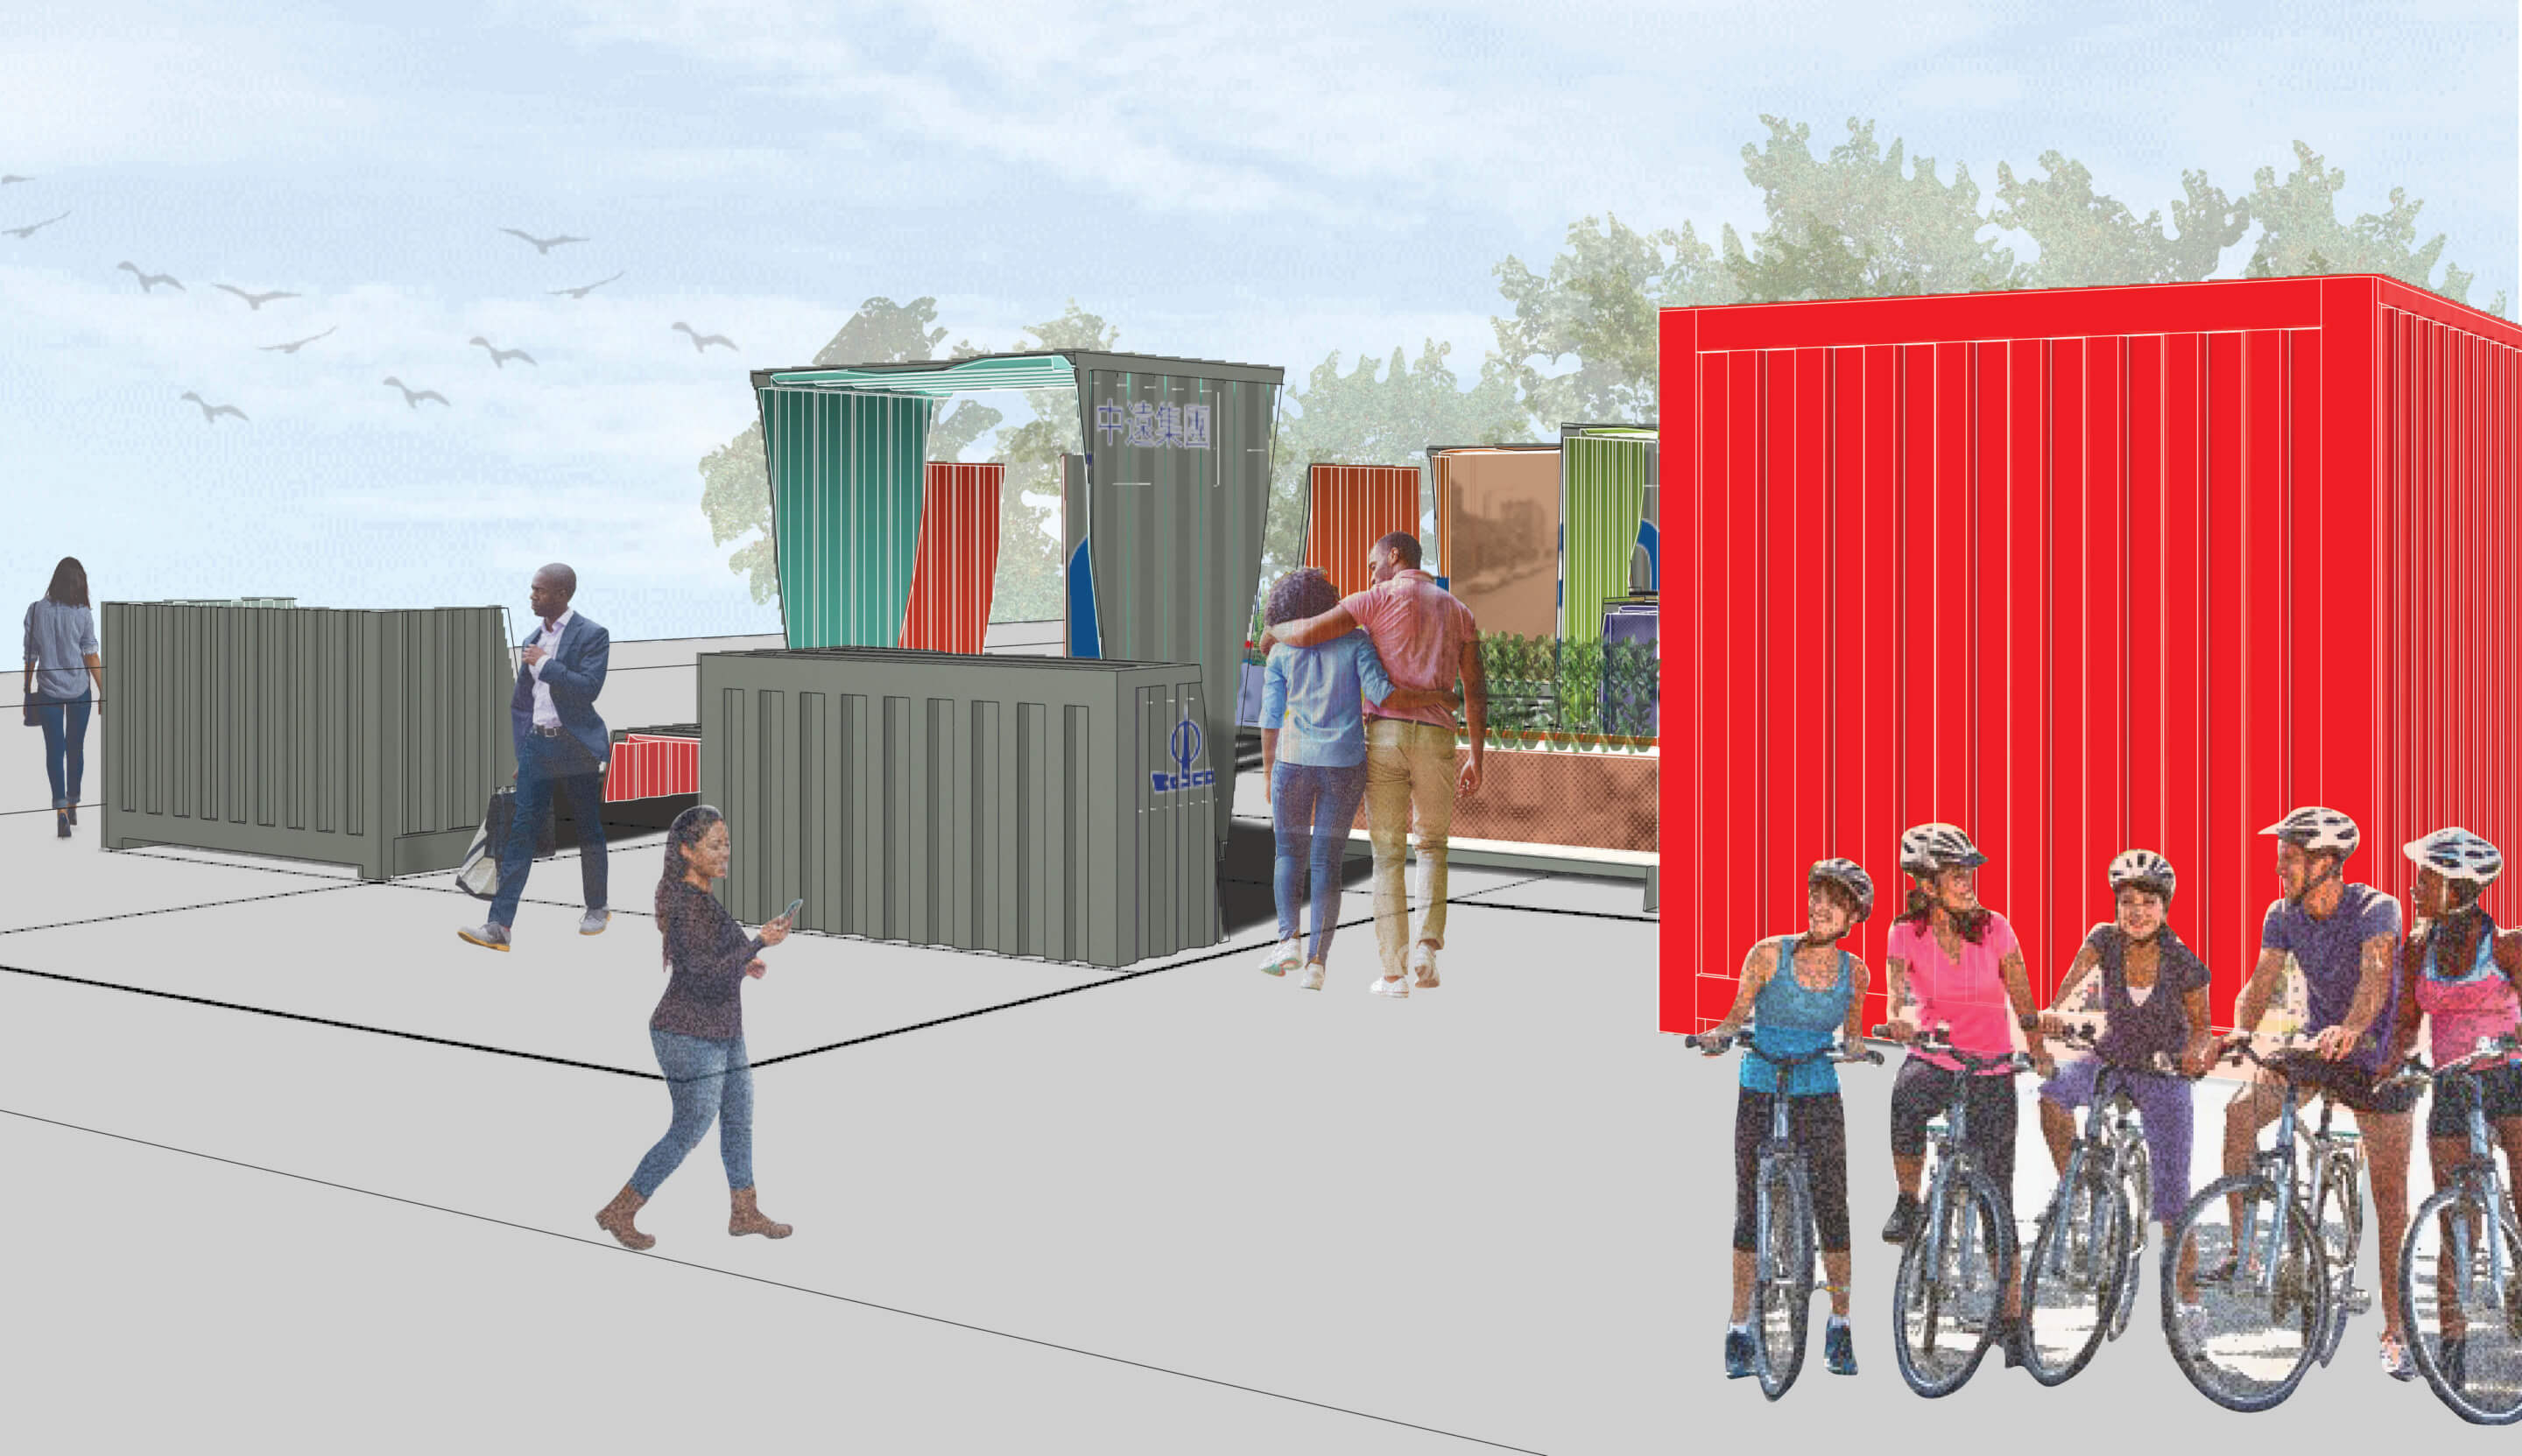 rendering of a shipping container-based public space